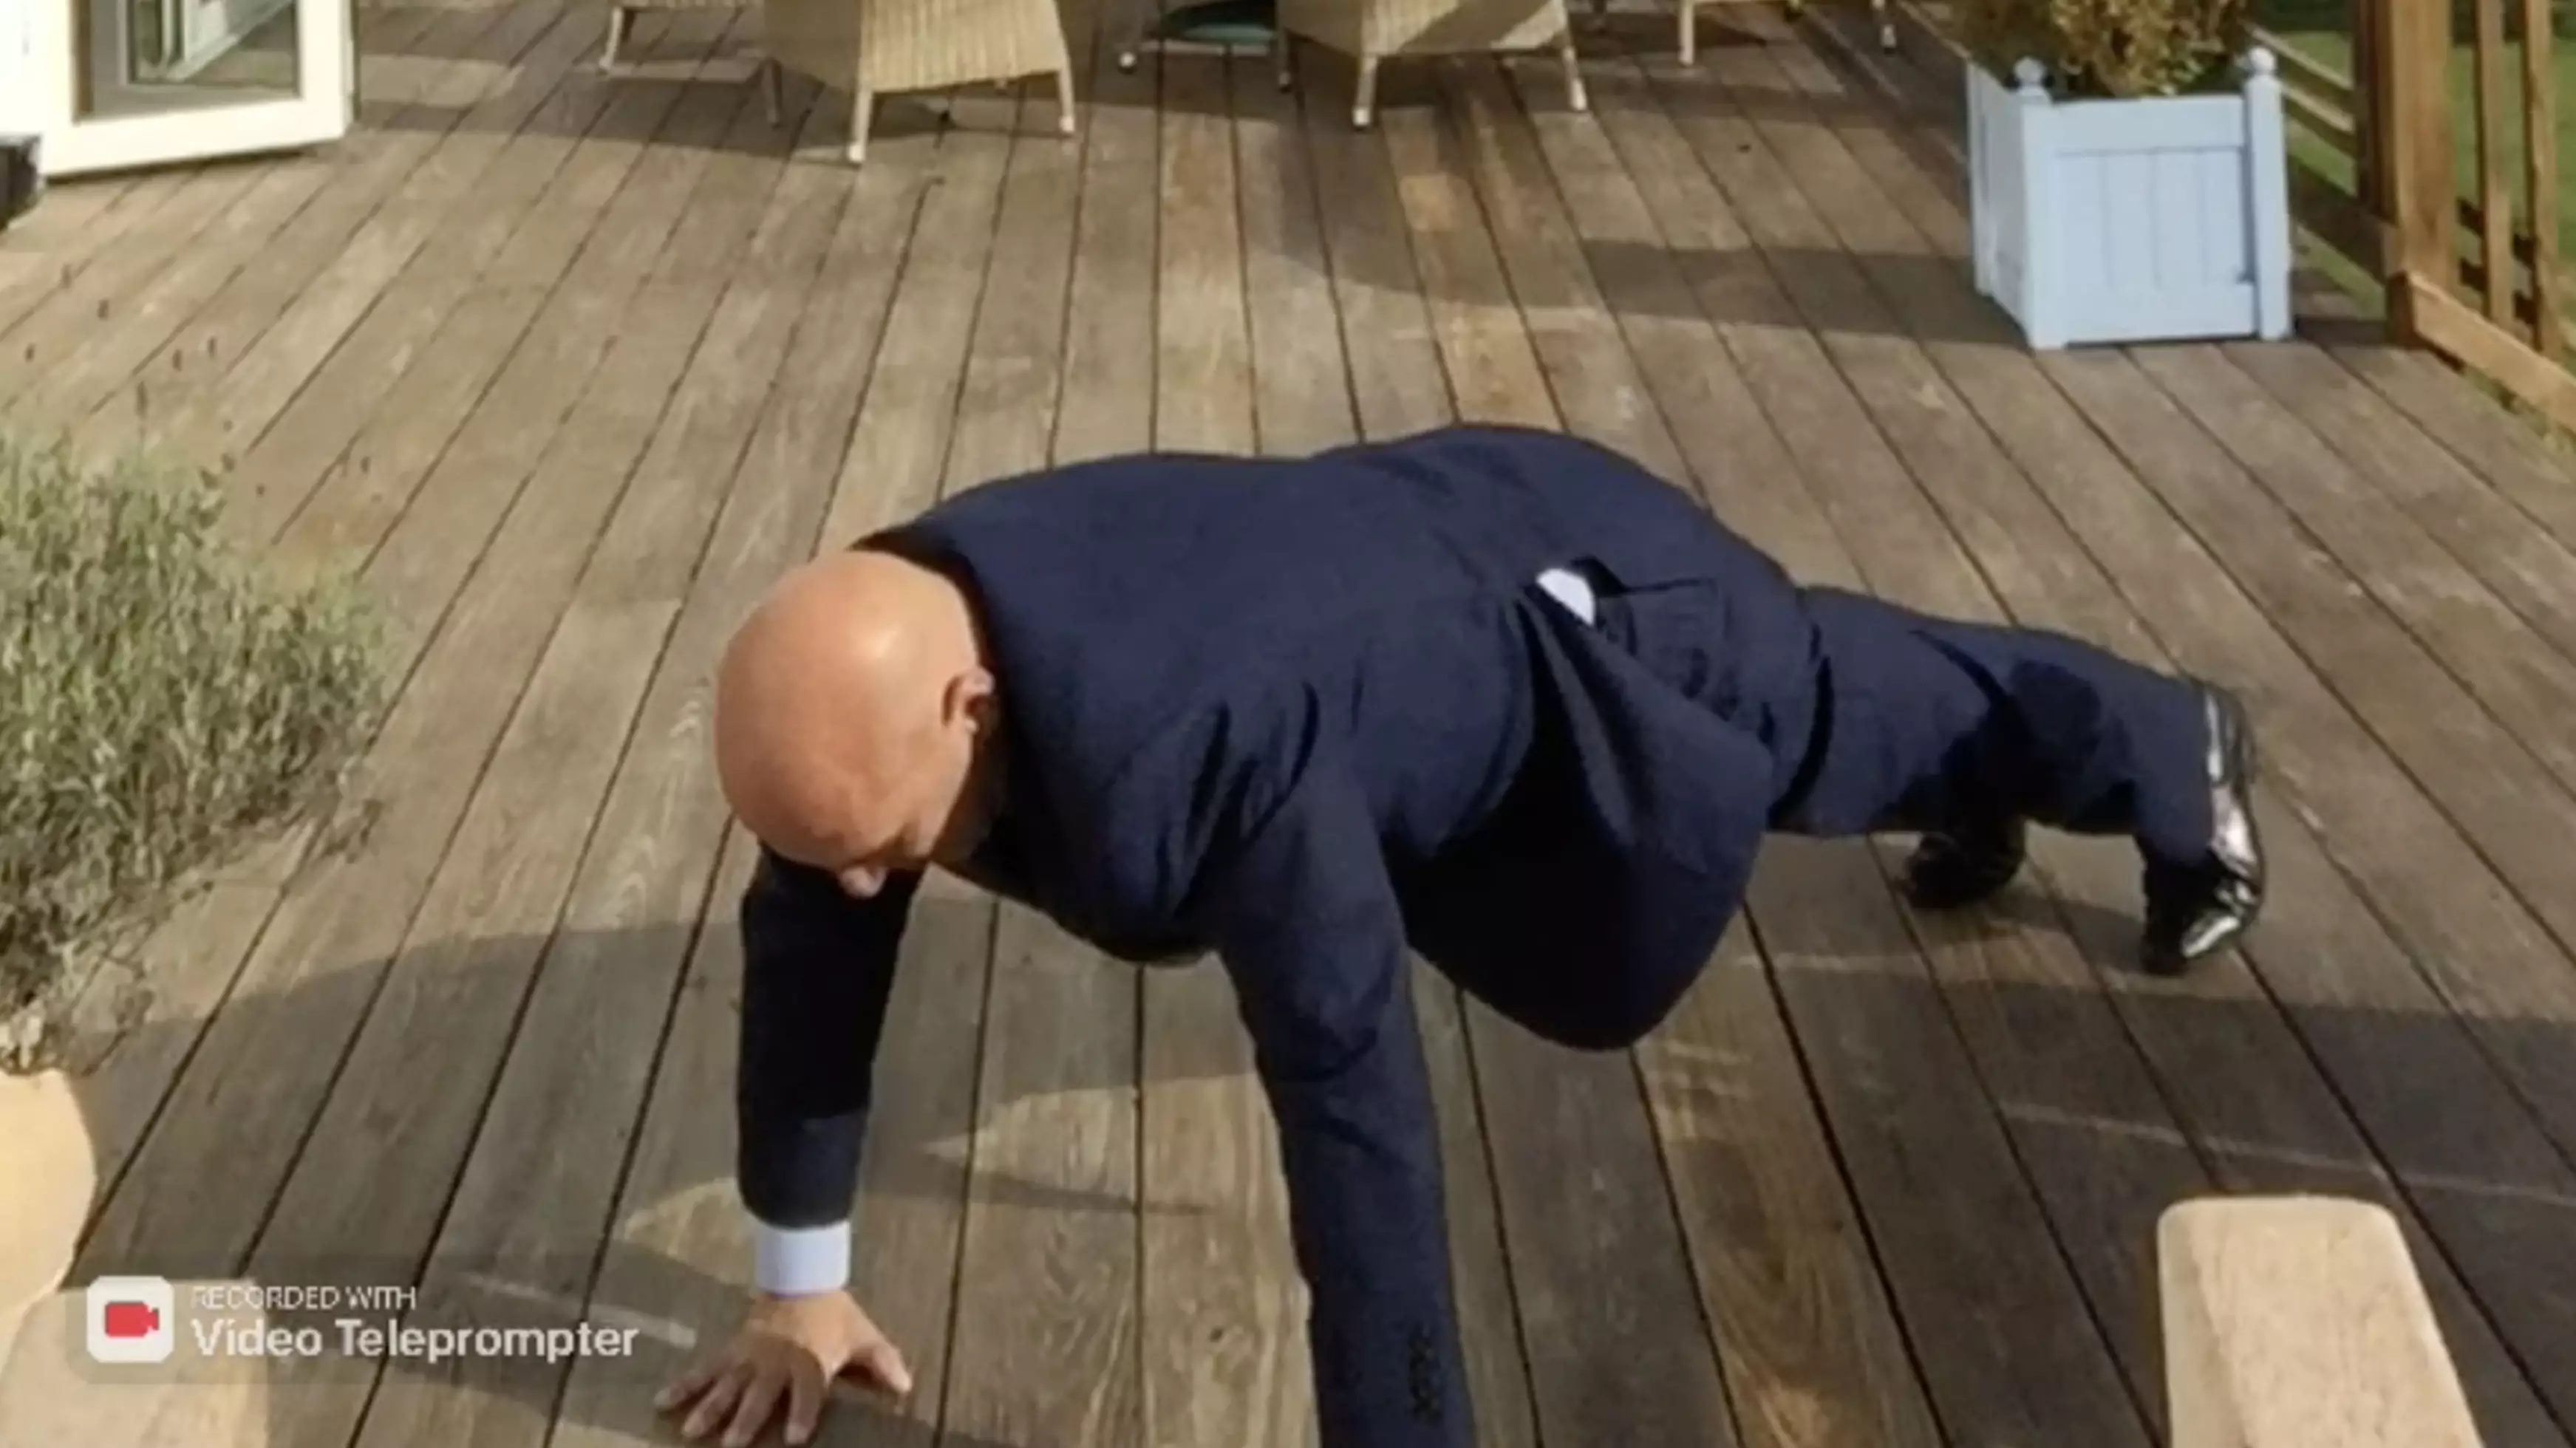 Jobseeker, 60, Posts Video Doing Press Up To Show He's Not 'Too Old' To Be Hired